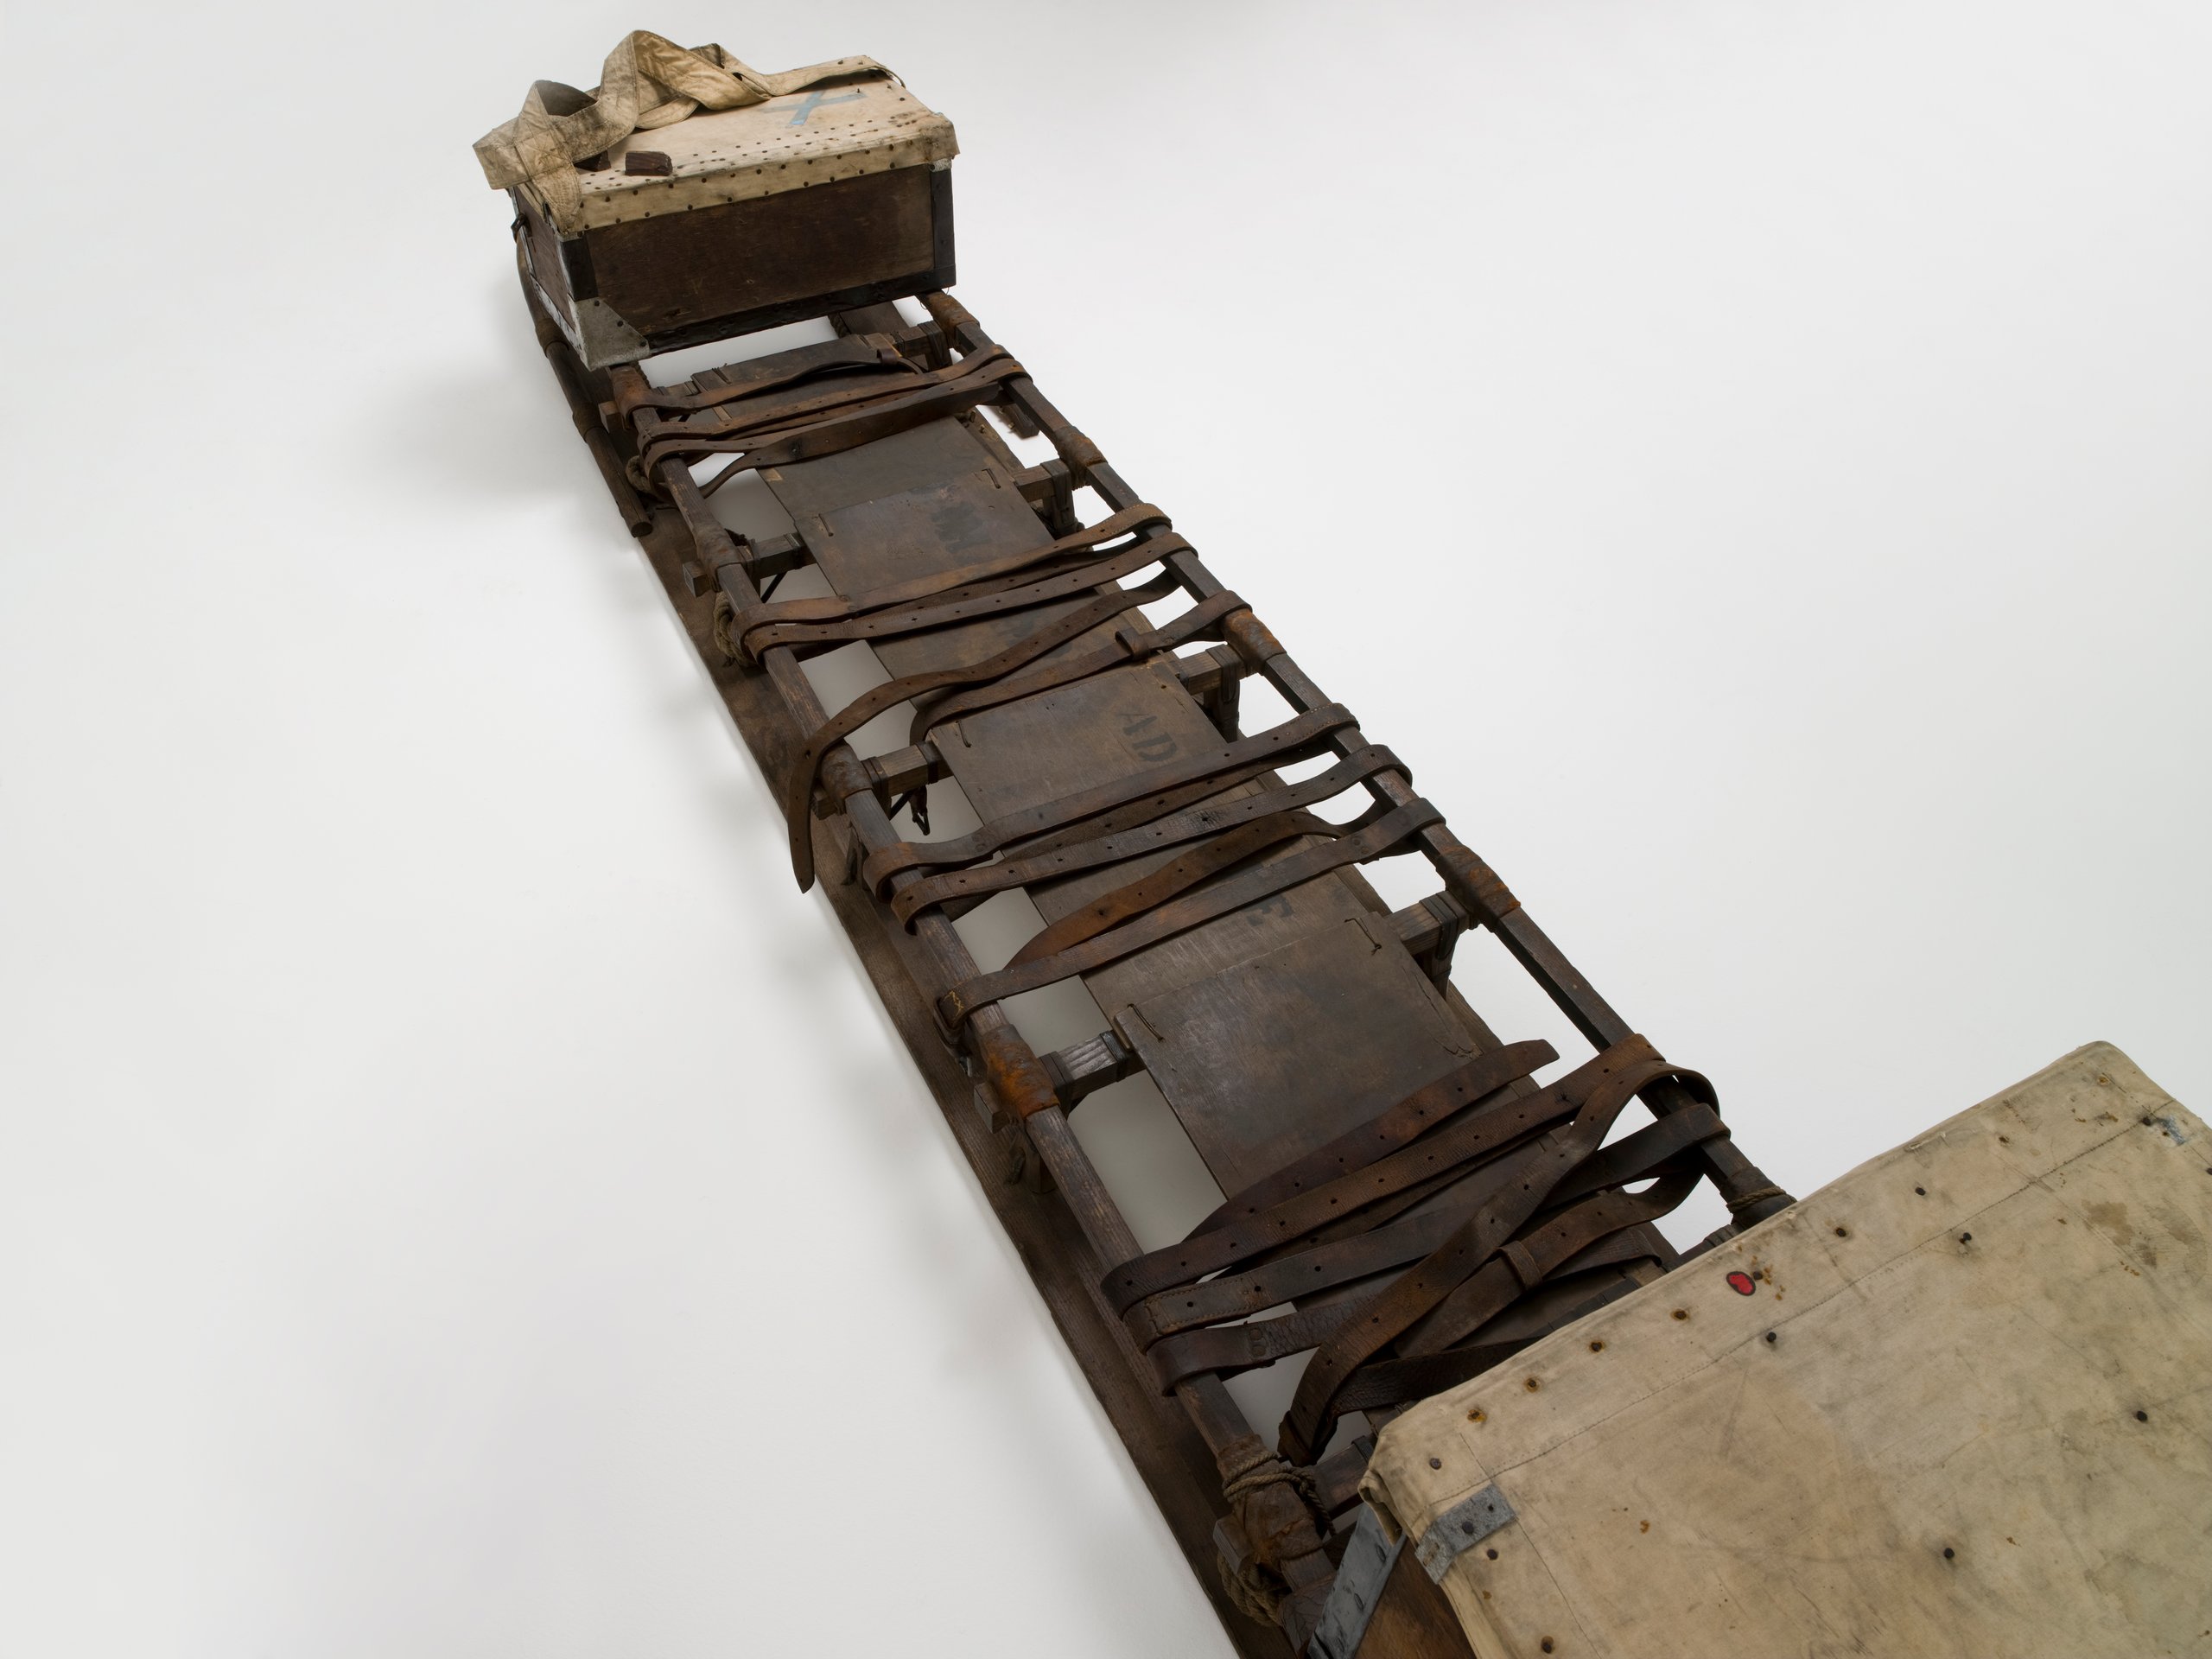 Antarctic sledge made by L Hagen, Norway, used on Douglas Mawson's Australiasian Antarctic Expedition, 1911-1914